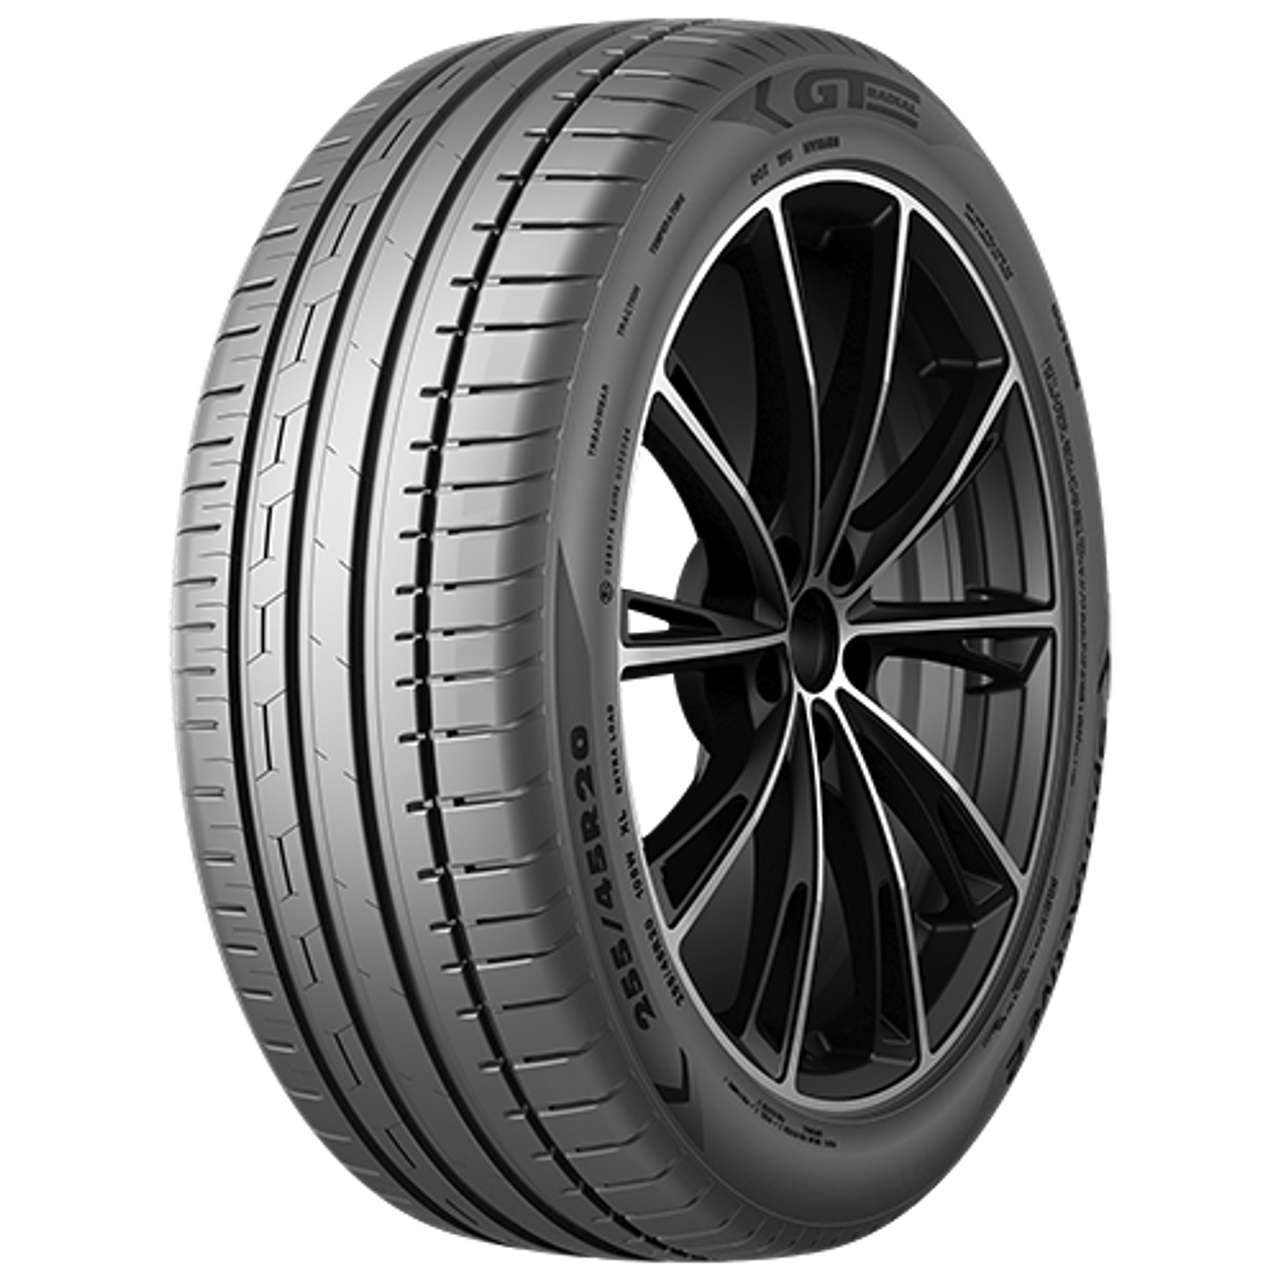 GT-RADIAL SPORTACTIVE 2 245/45R17 99W BSW